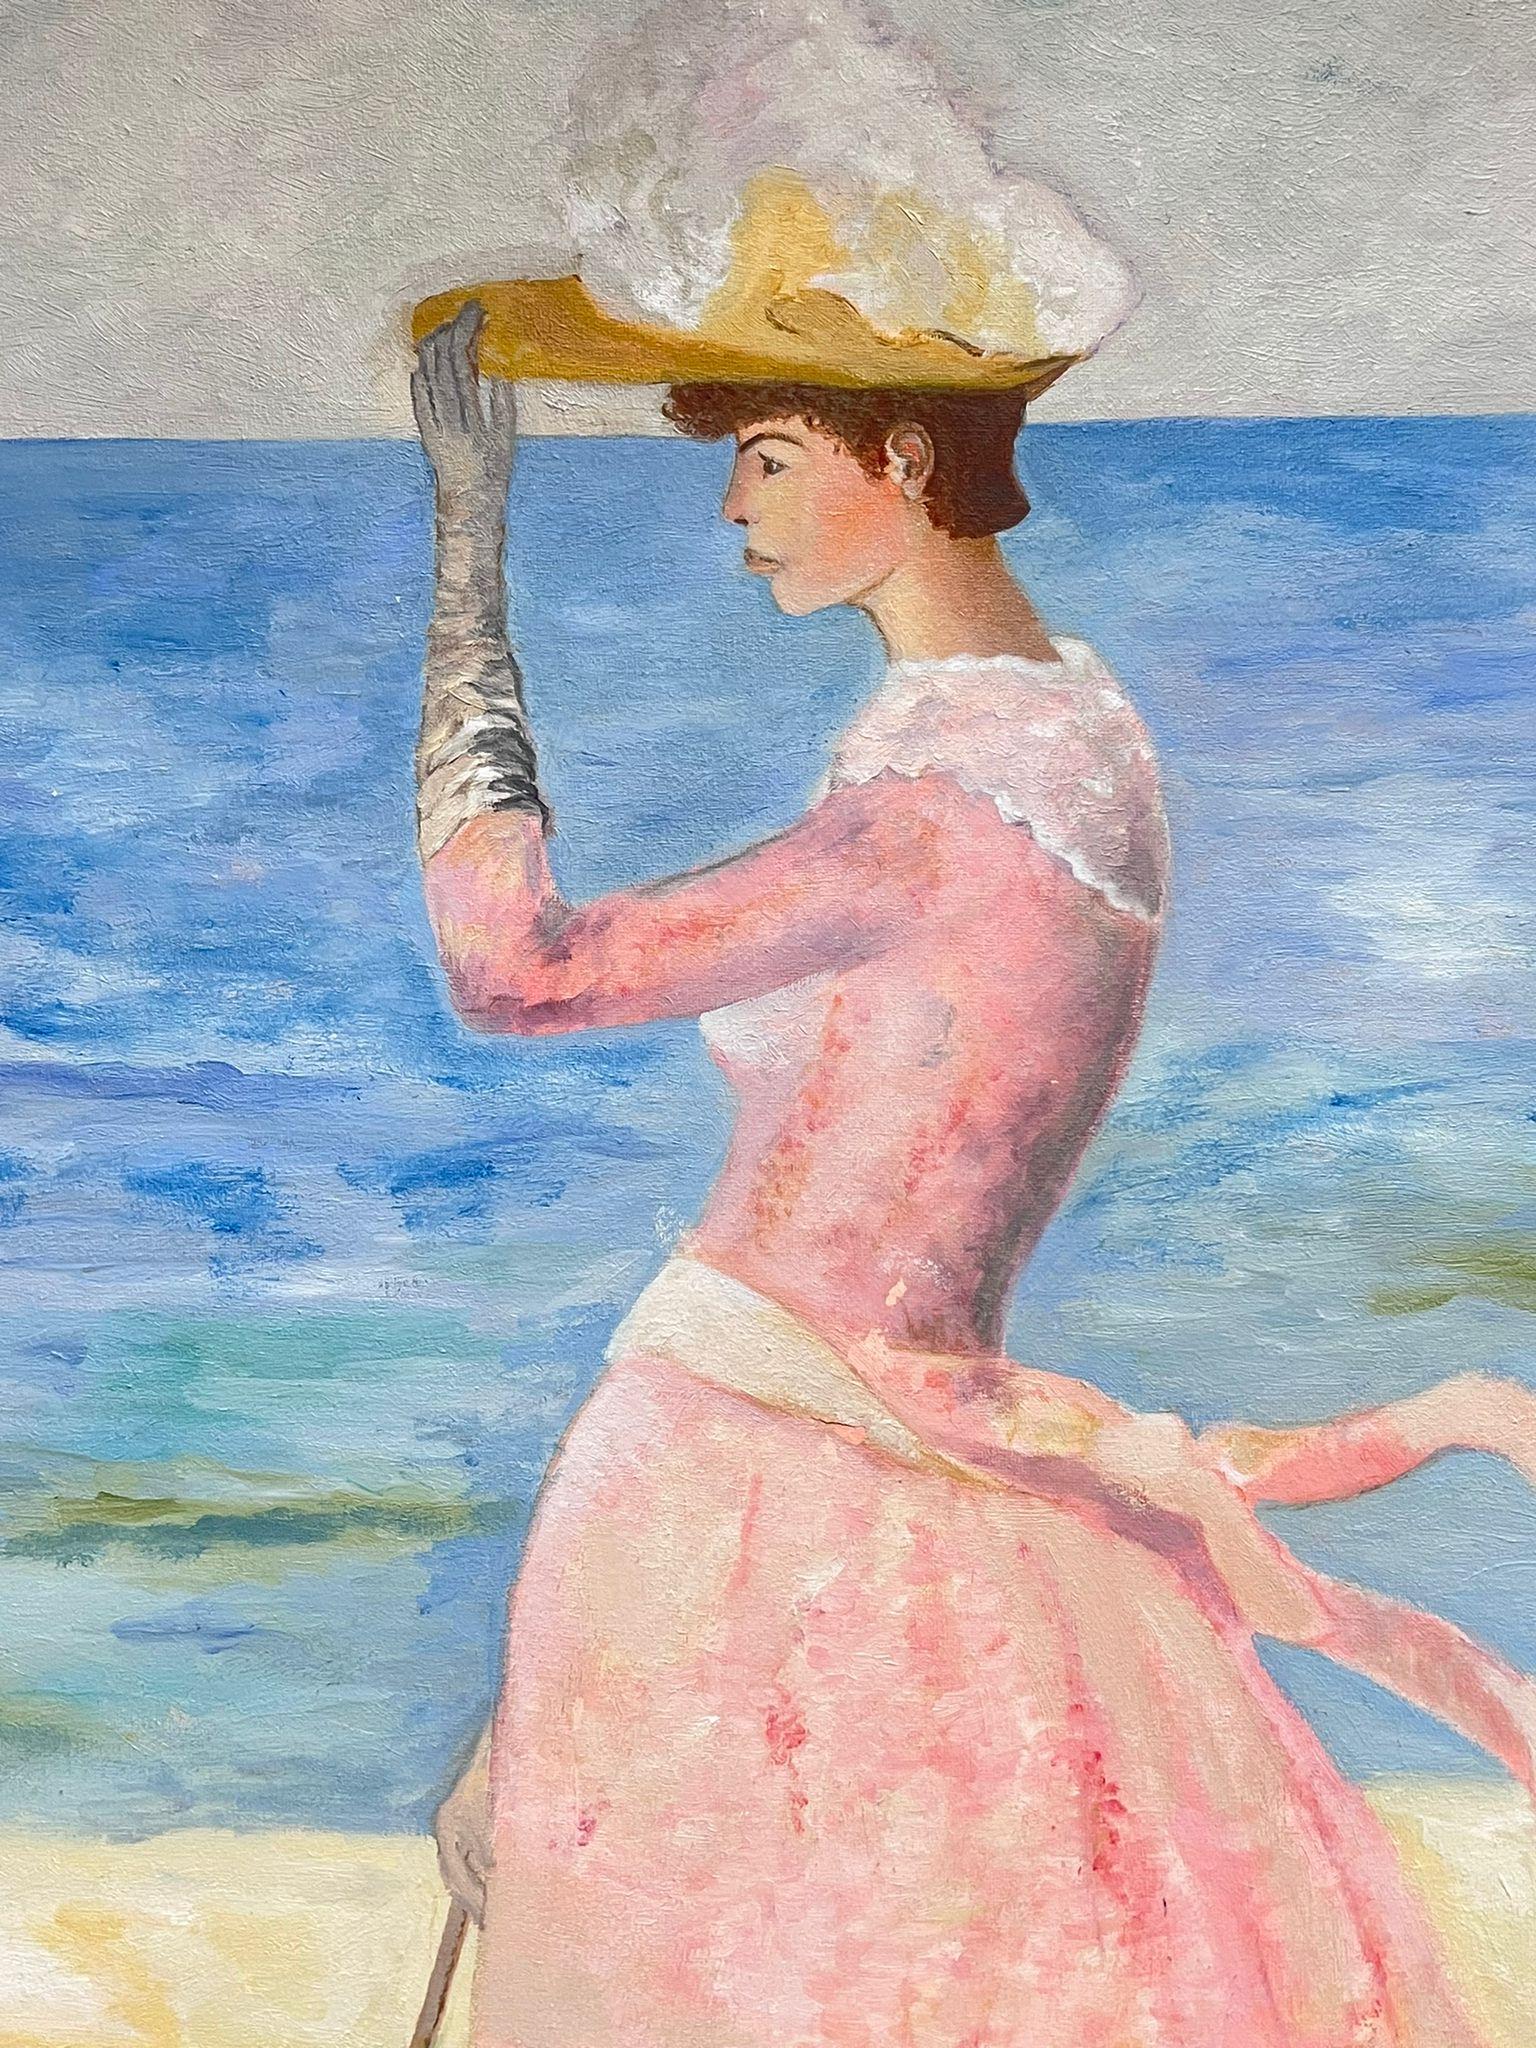 Portrait of Elegant Lady in Pink Dress with Parasol by Beach Original French Oil - Painting by French School 